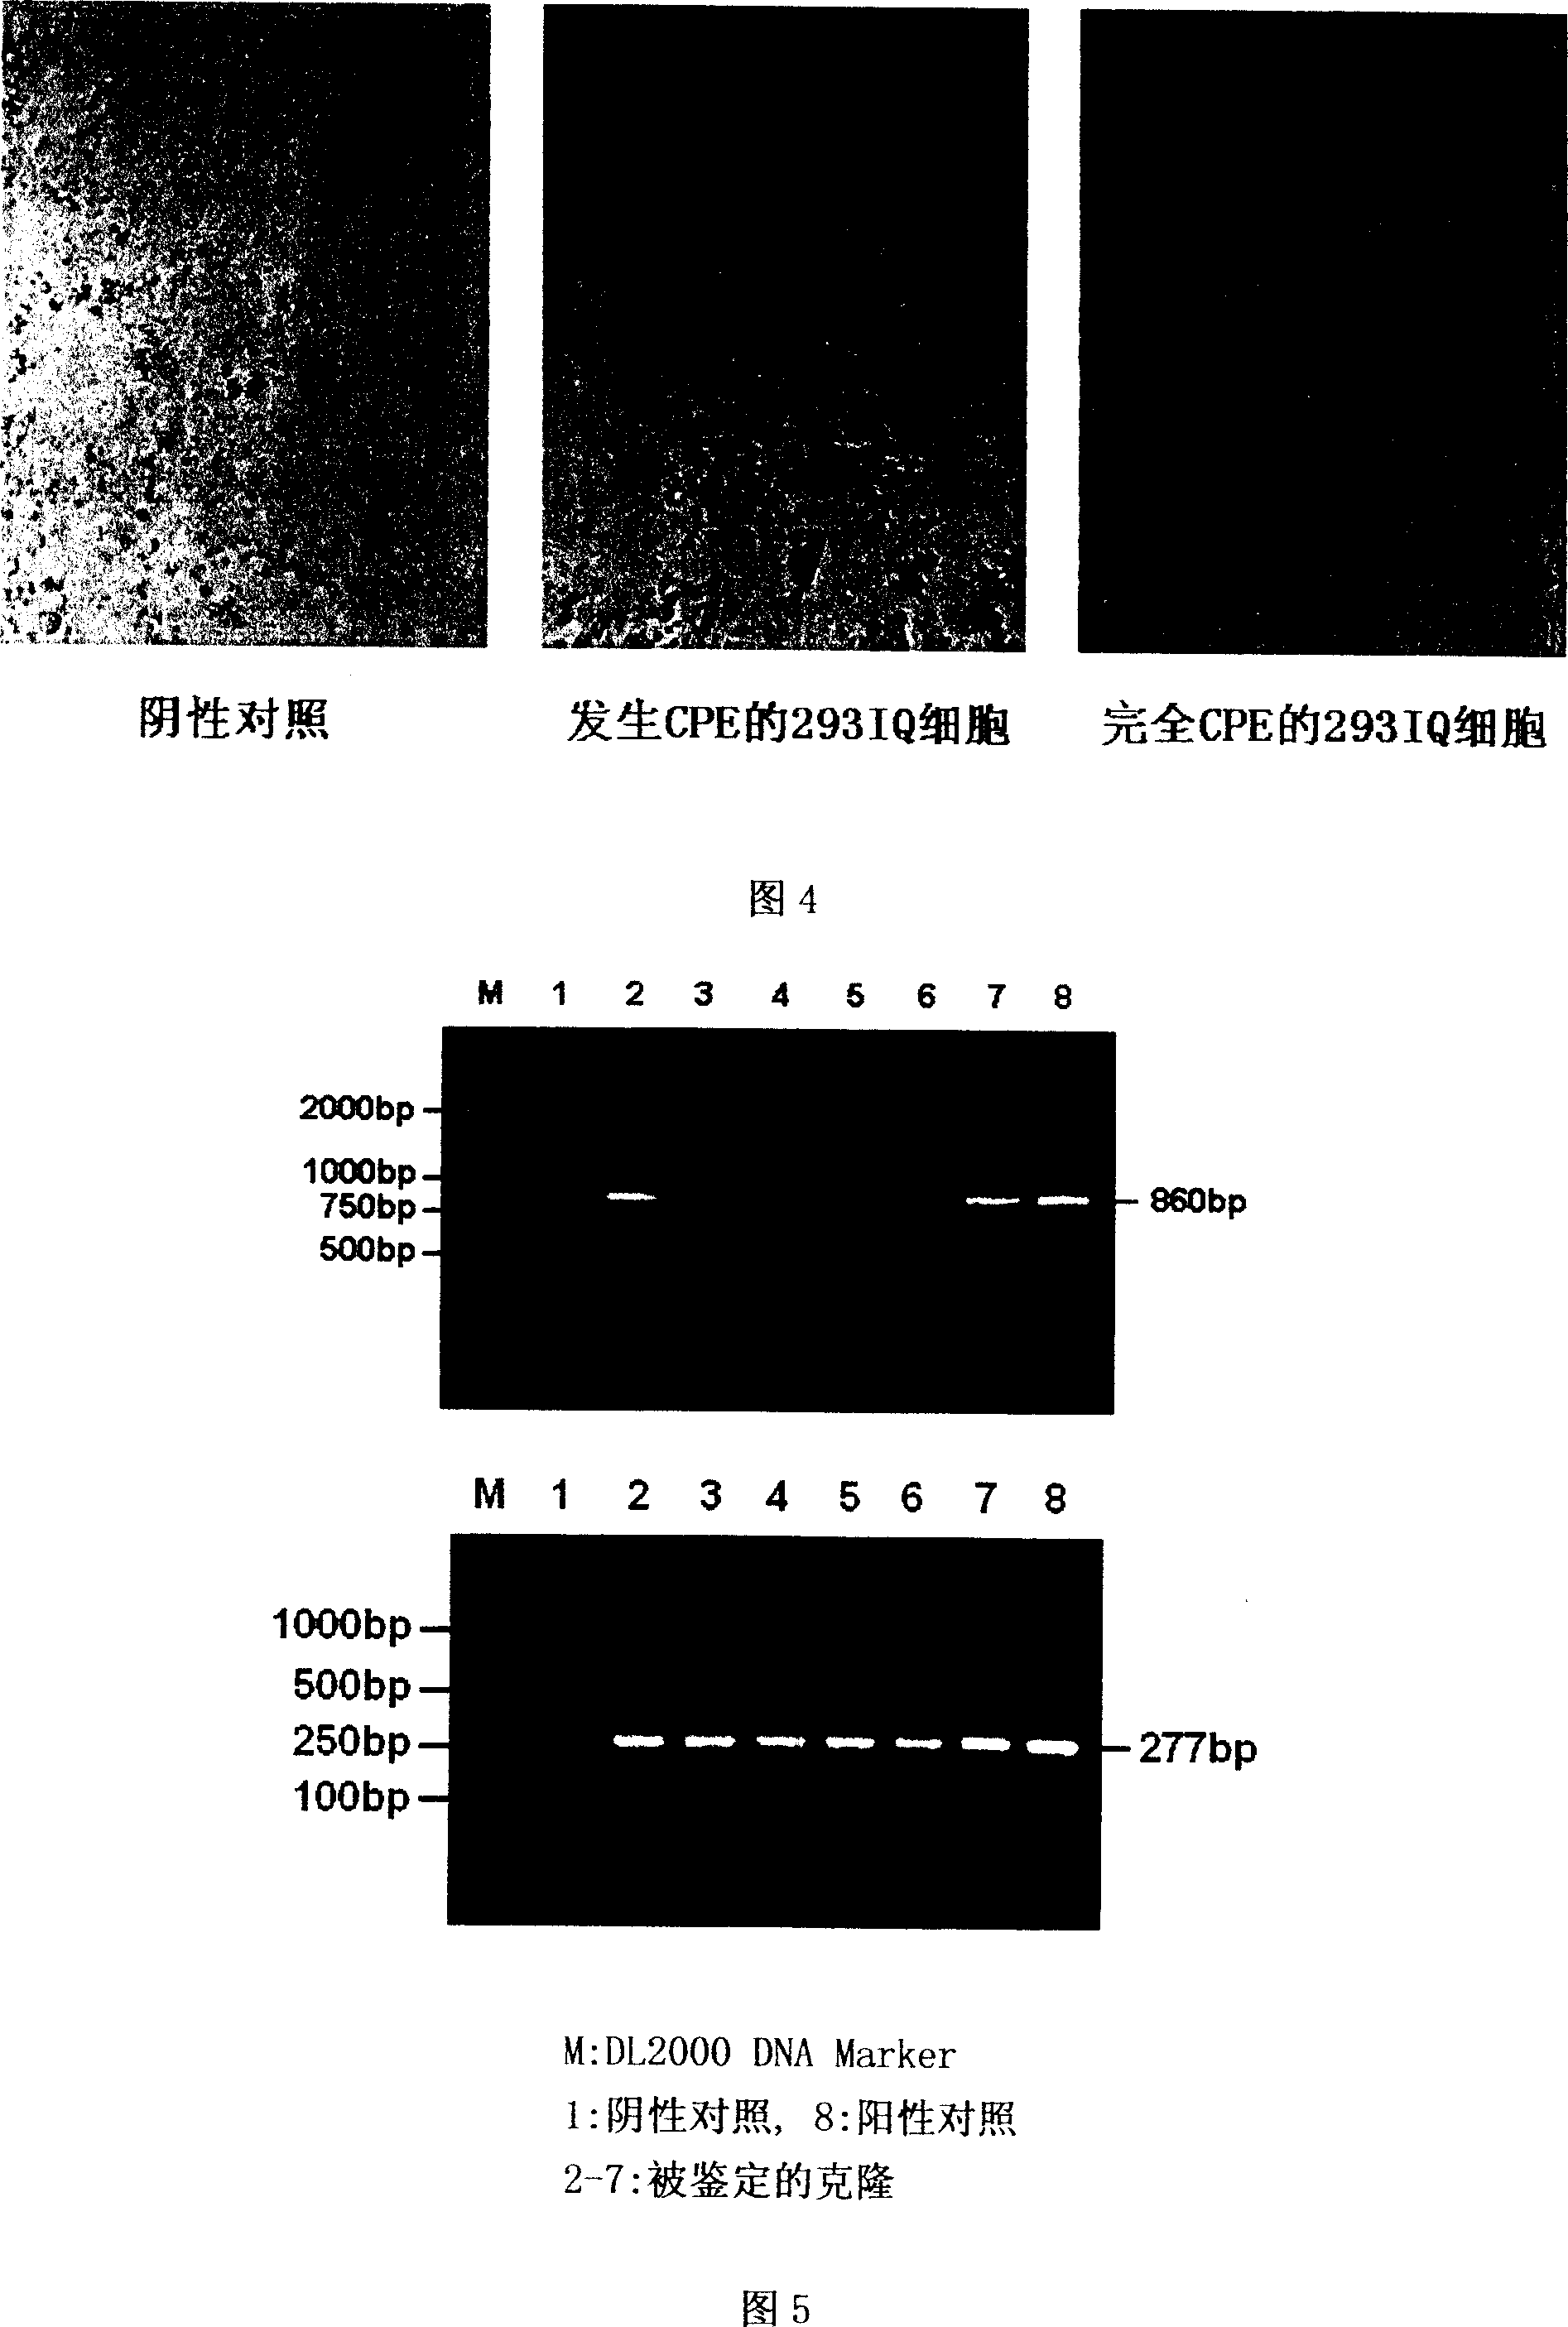 Recombinant of intelligent adenovirus vector and khp53 gene and application thereof